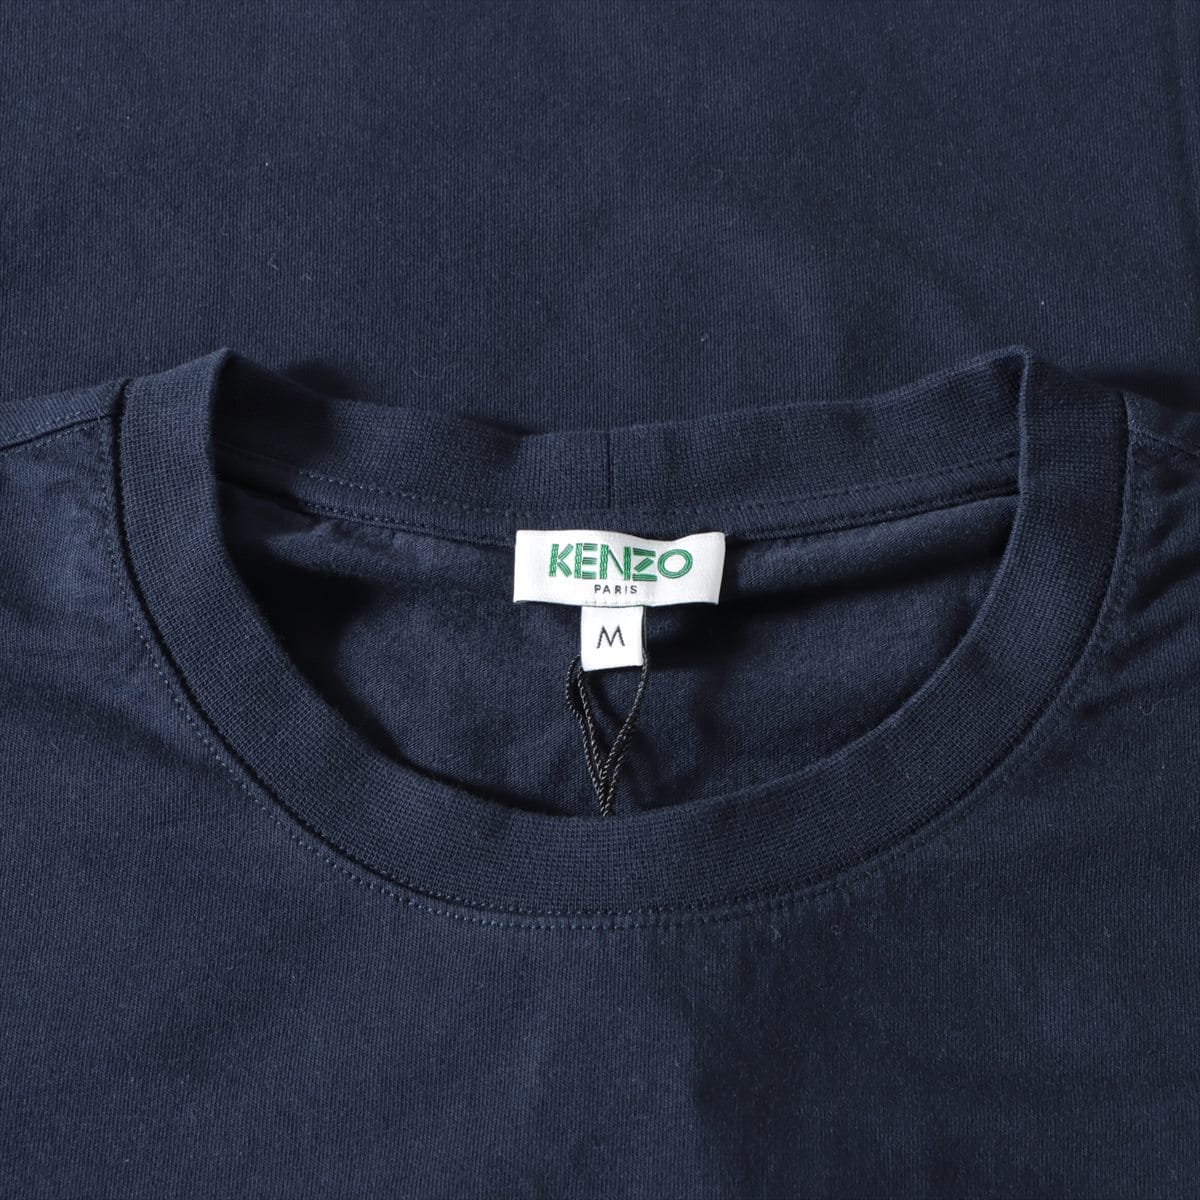 KENZO Cotton T-shirt M Men's Navy blue  Out of quality tag